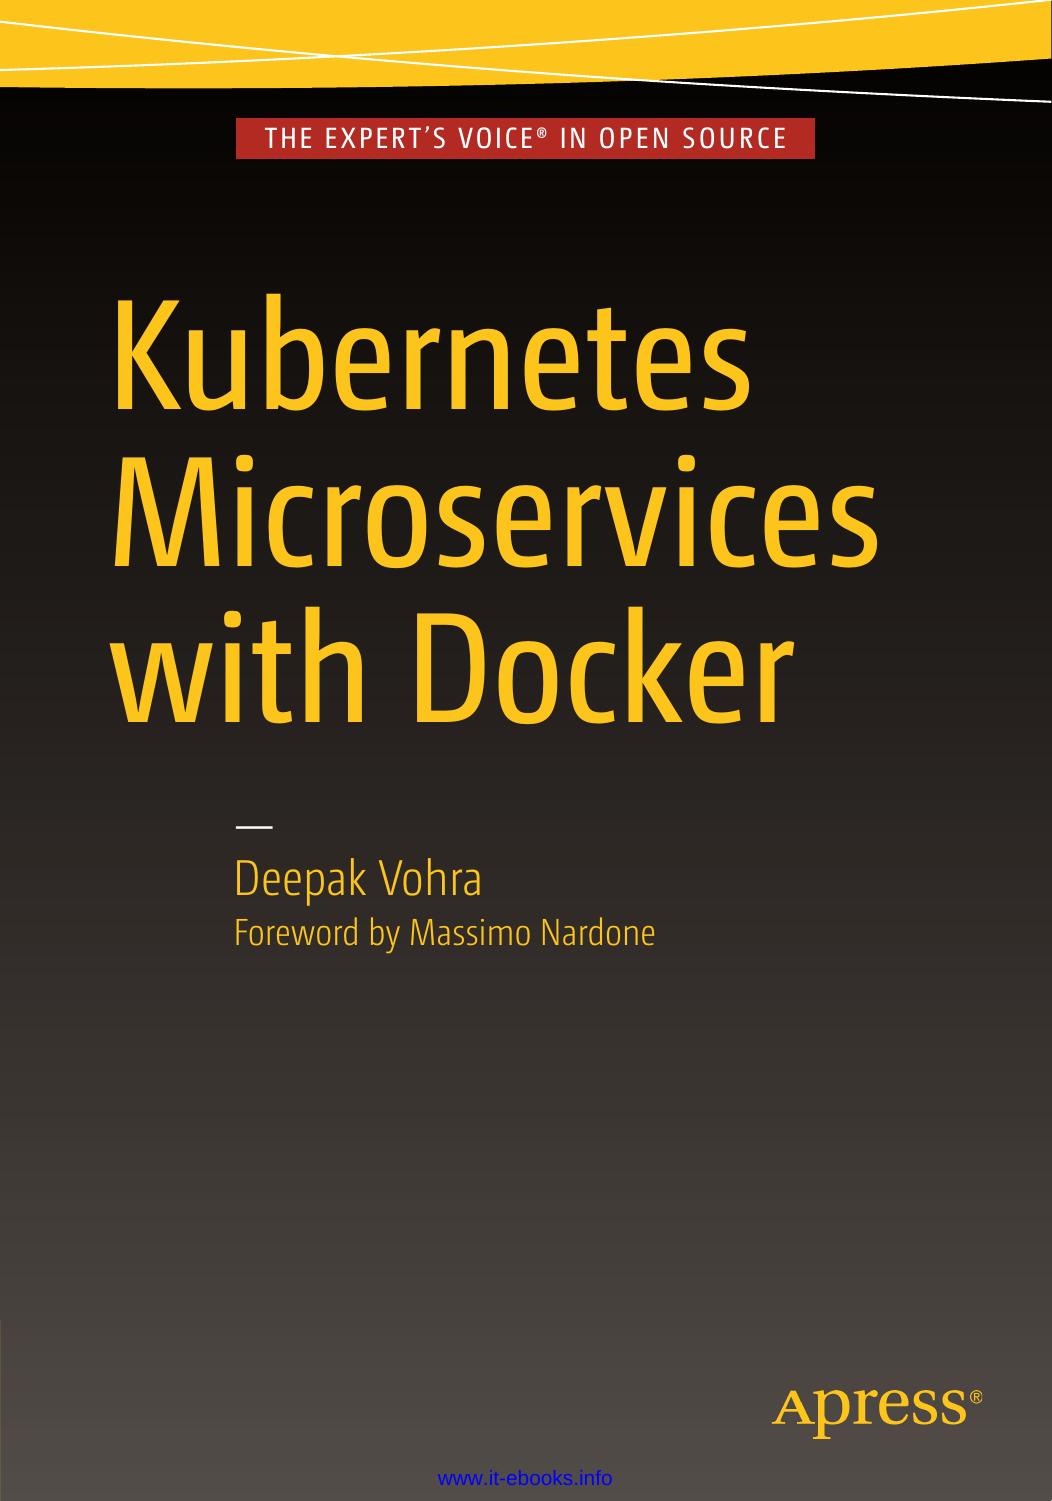 Kubernetes Microservices with Docker by Deepak Vohra